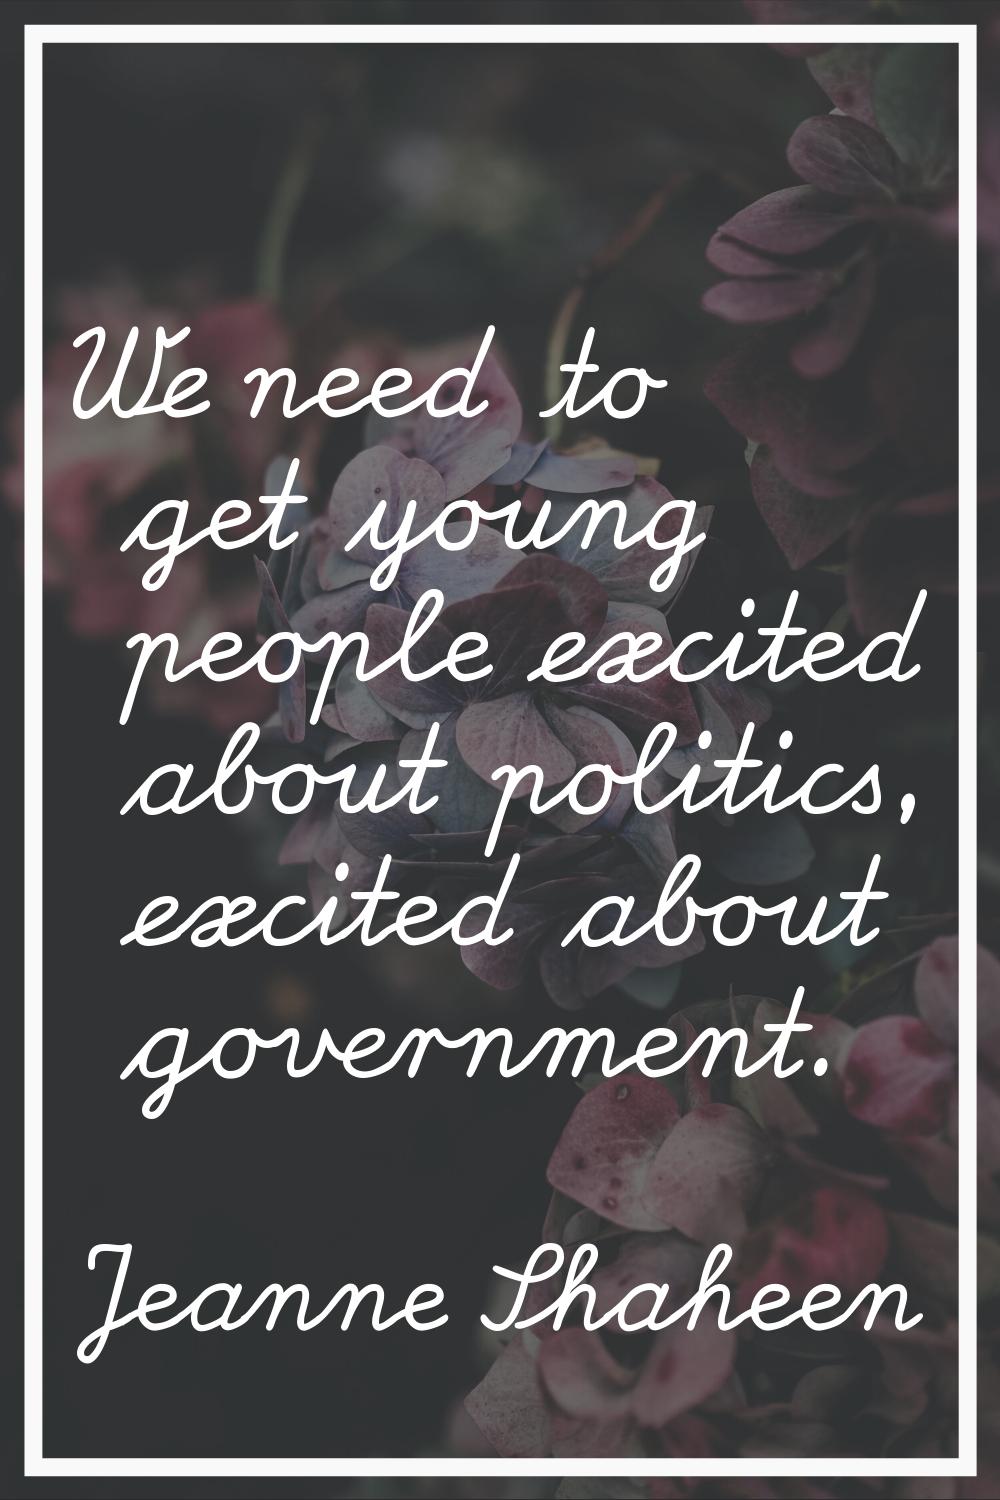 We need to get young people excited about politics, excited about government.